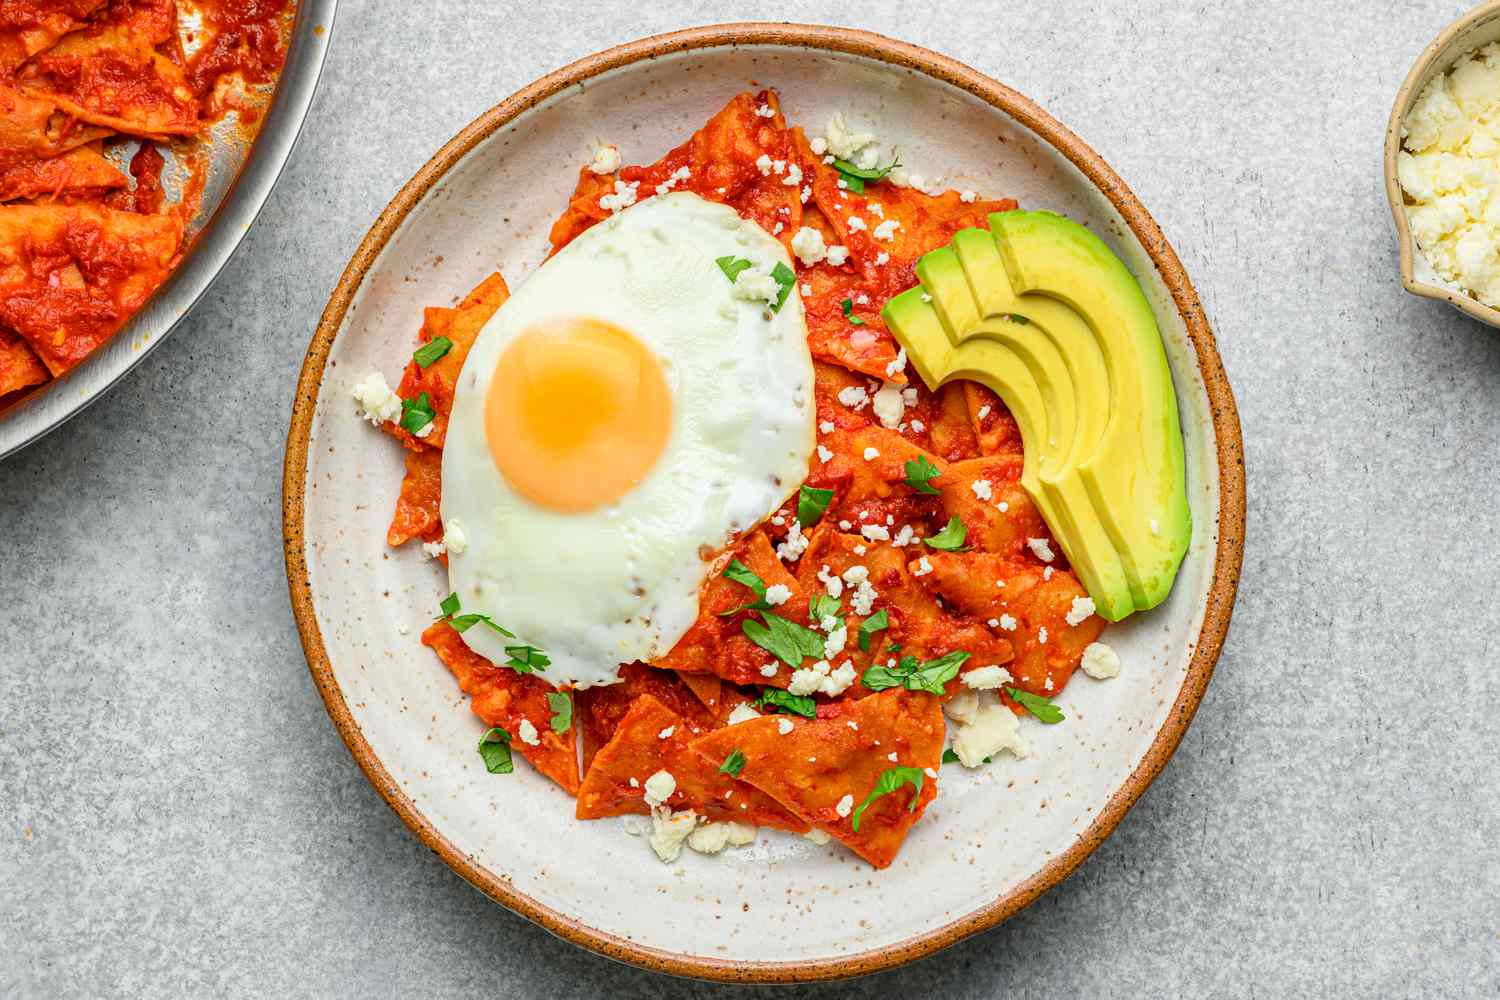 A plate of chilaquiles topped with a friend egg, cilantro, queso fresco, and sliced avocado